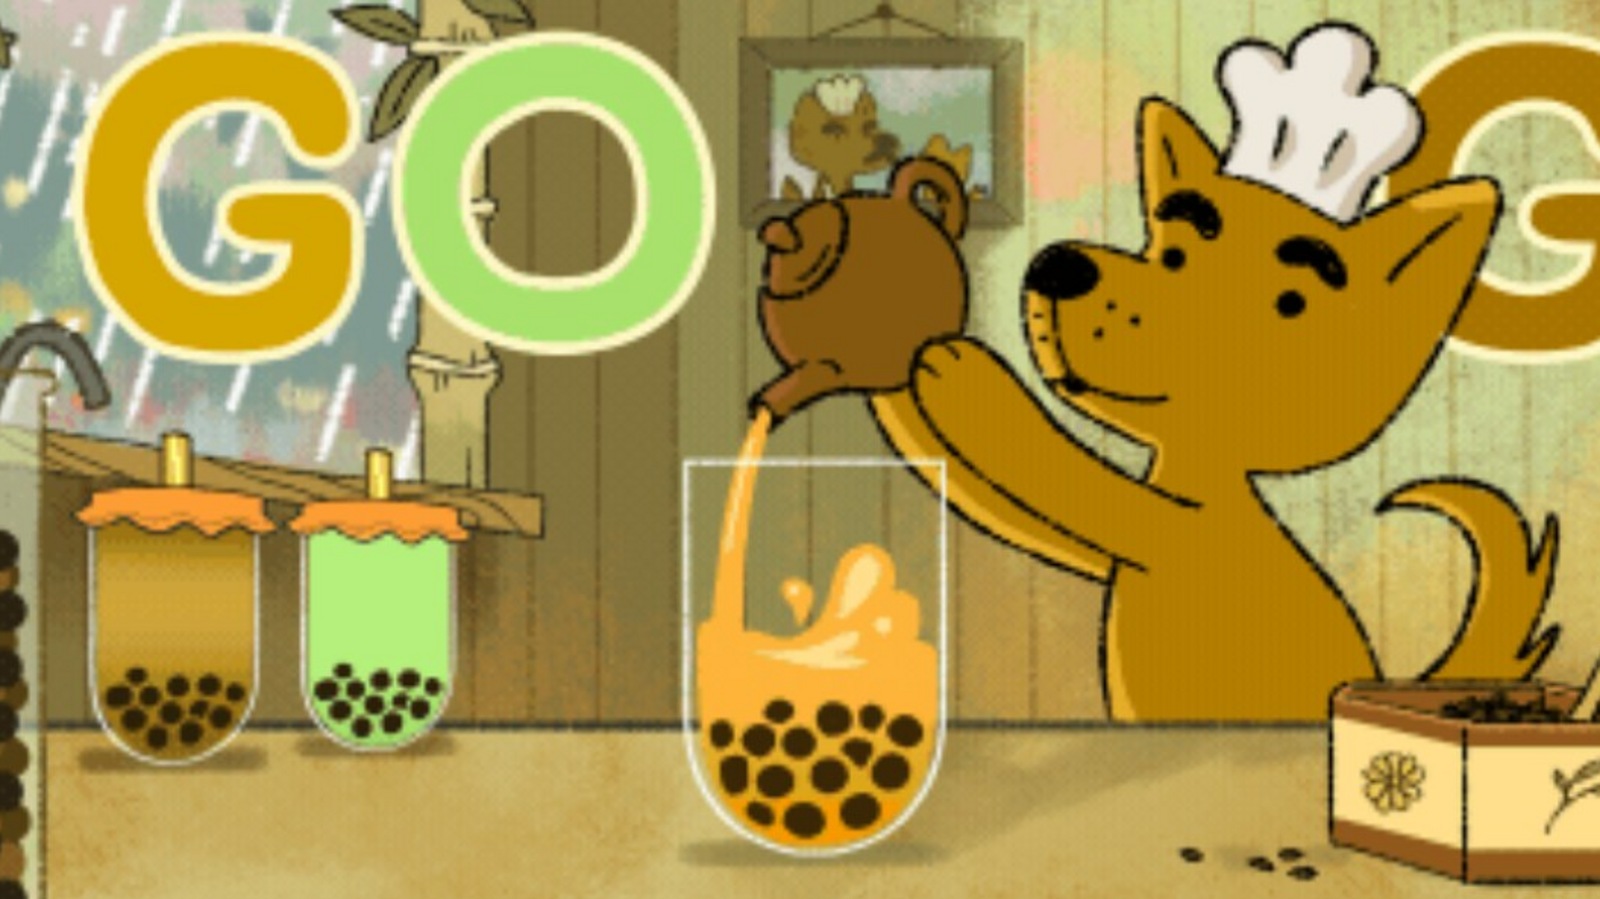 Google celebrates Taiwanese bubble tea with this interactive doodle